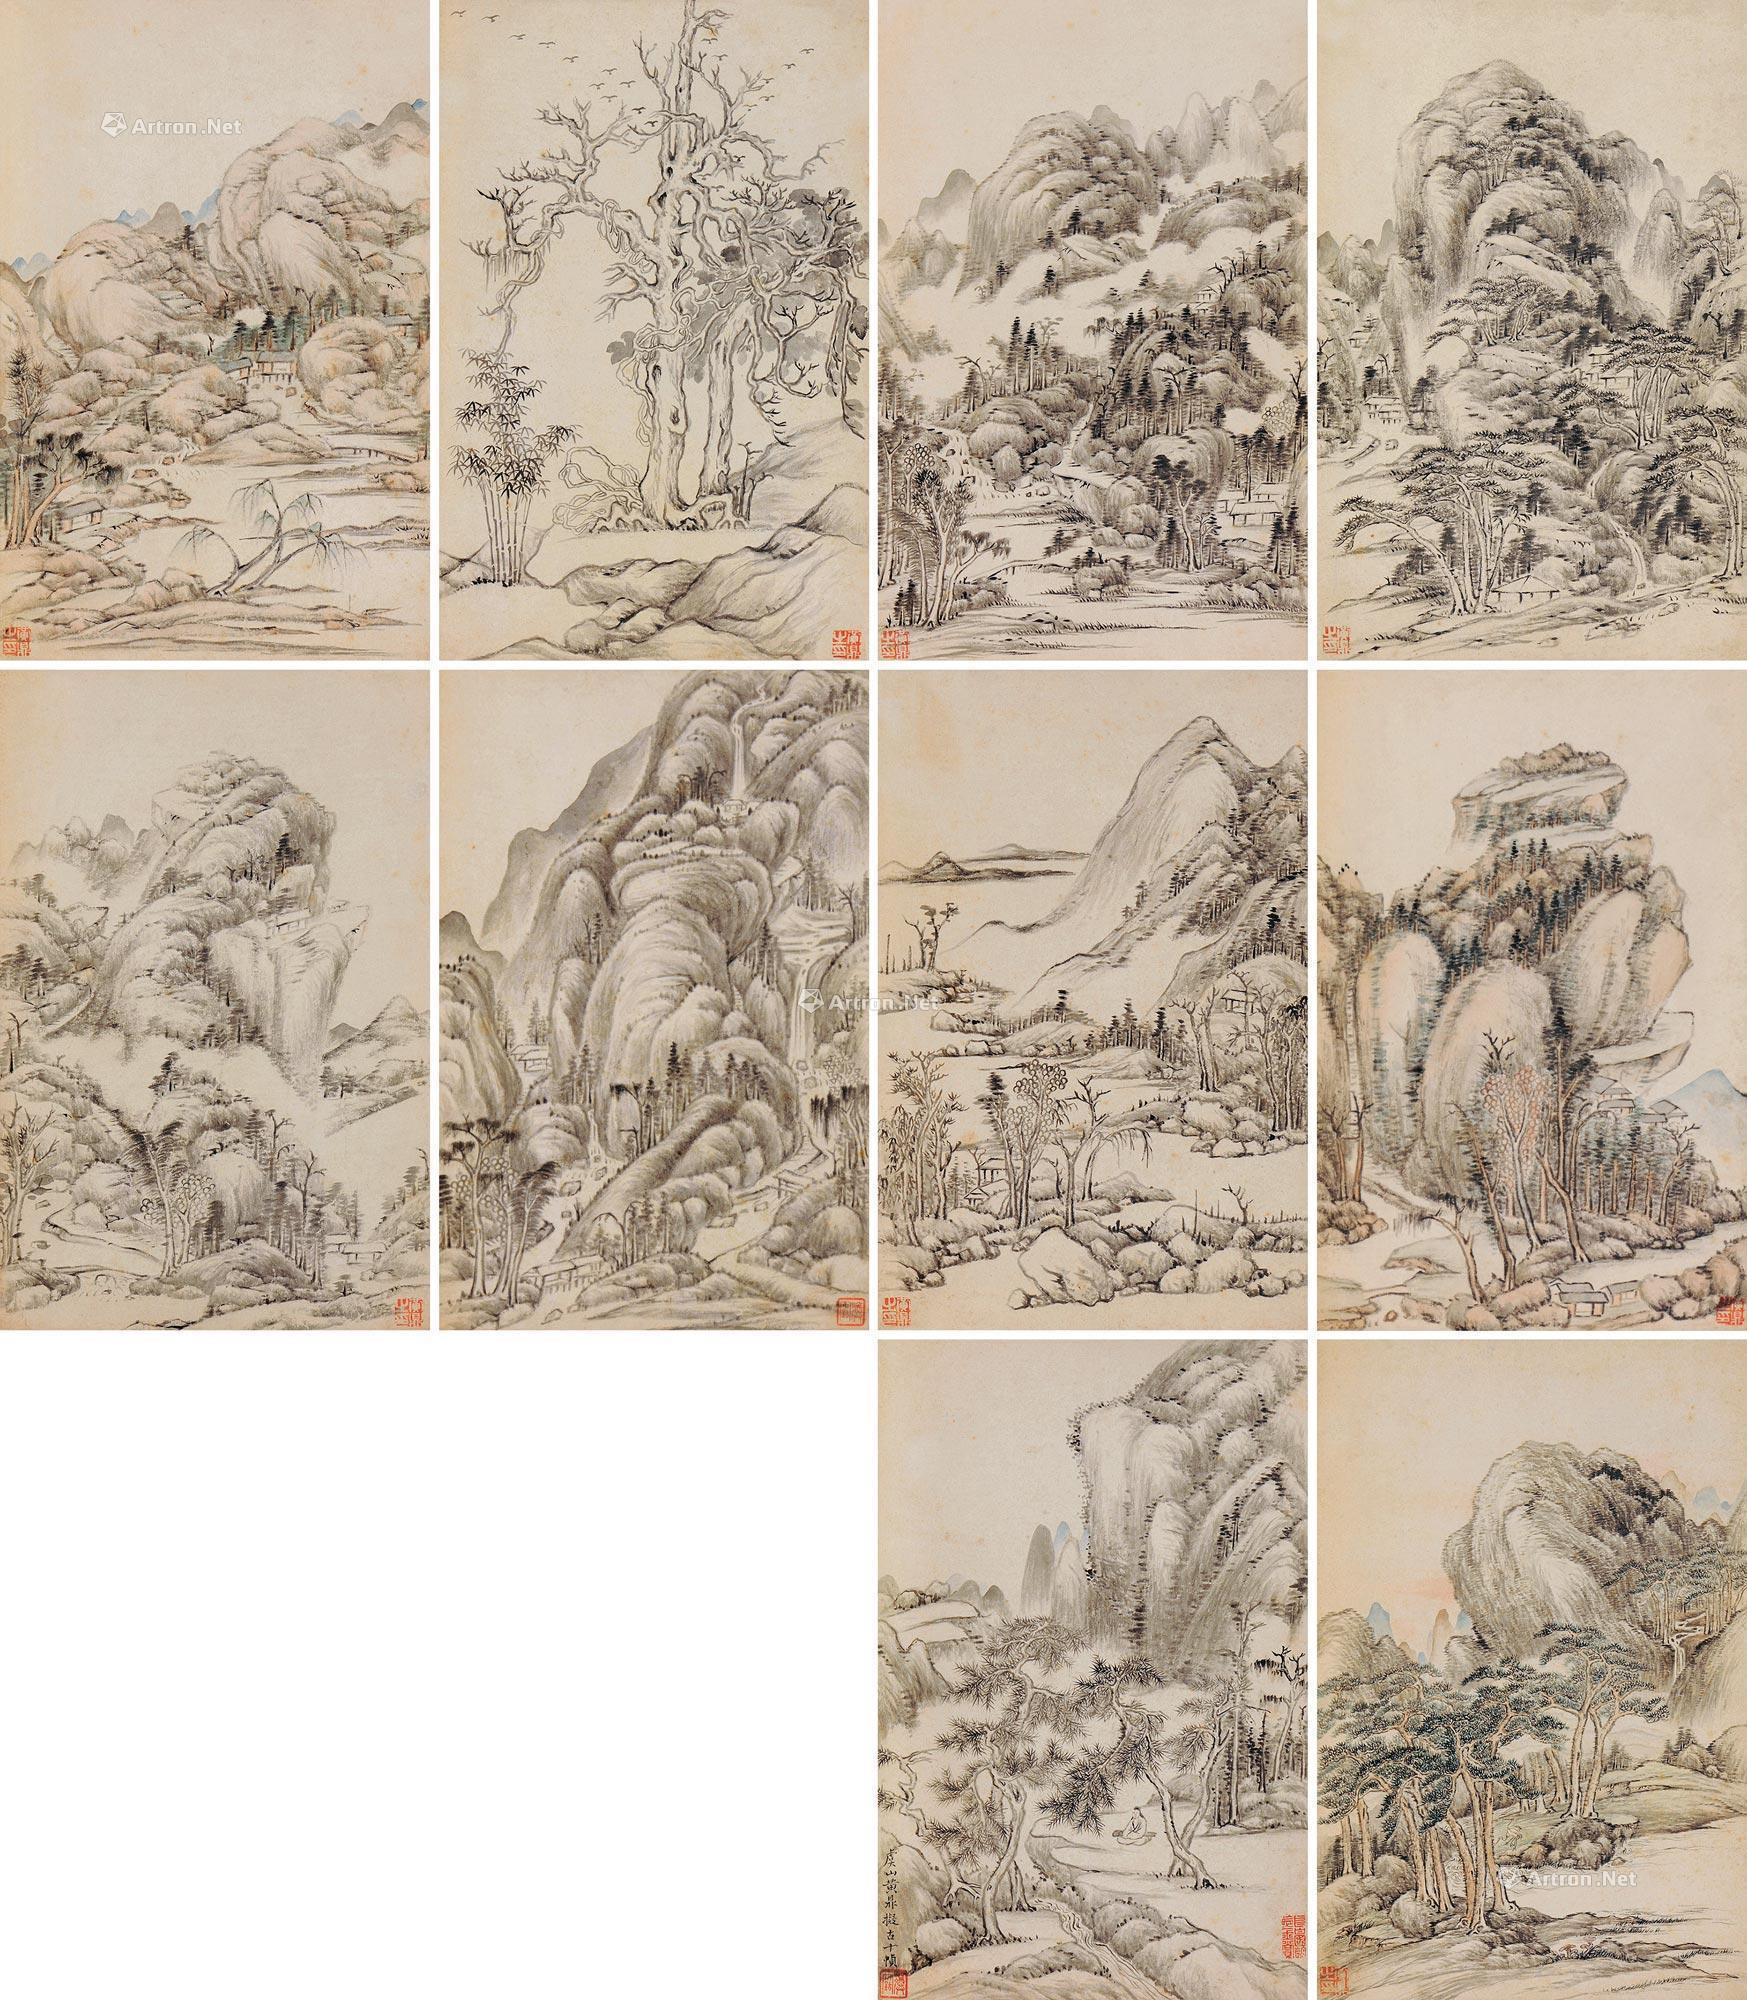 ALBUM OF LANDSCAPE IN ANCIENT STYLE